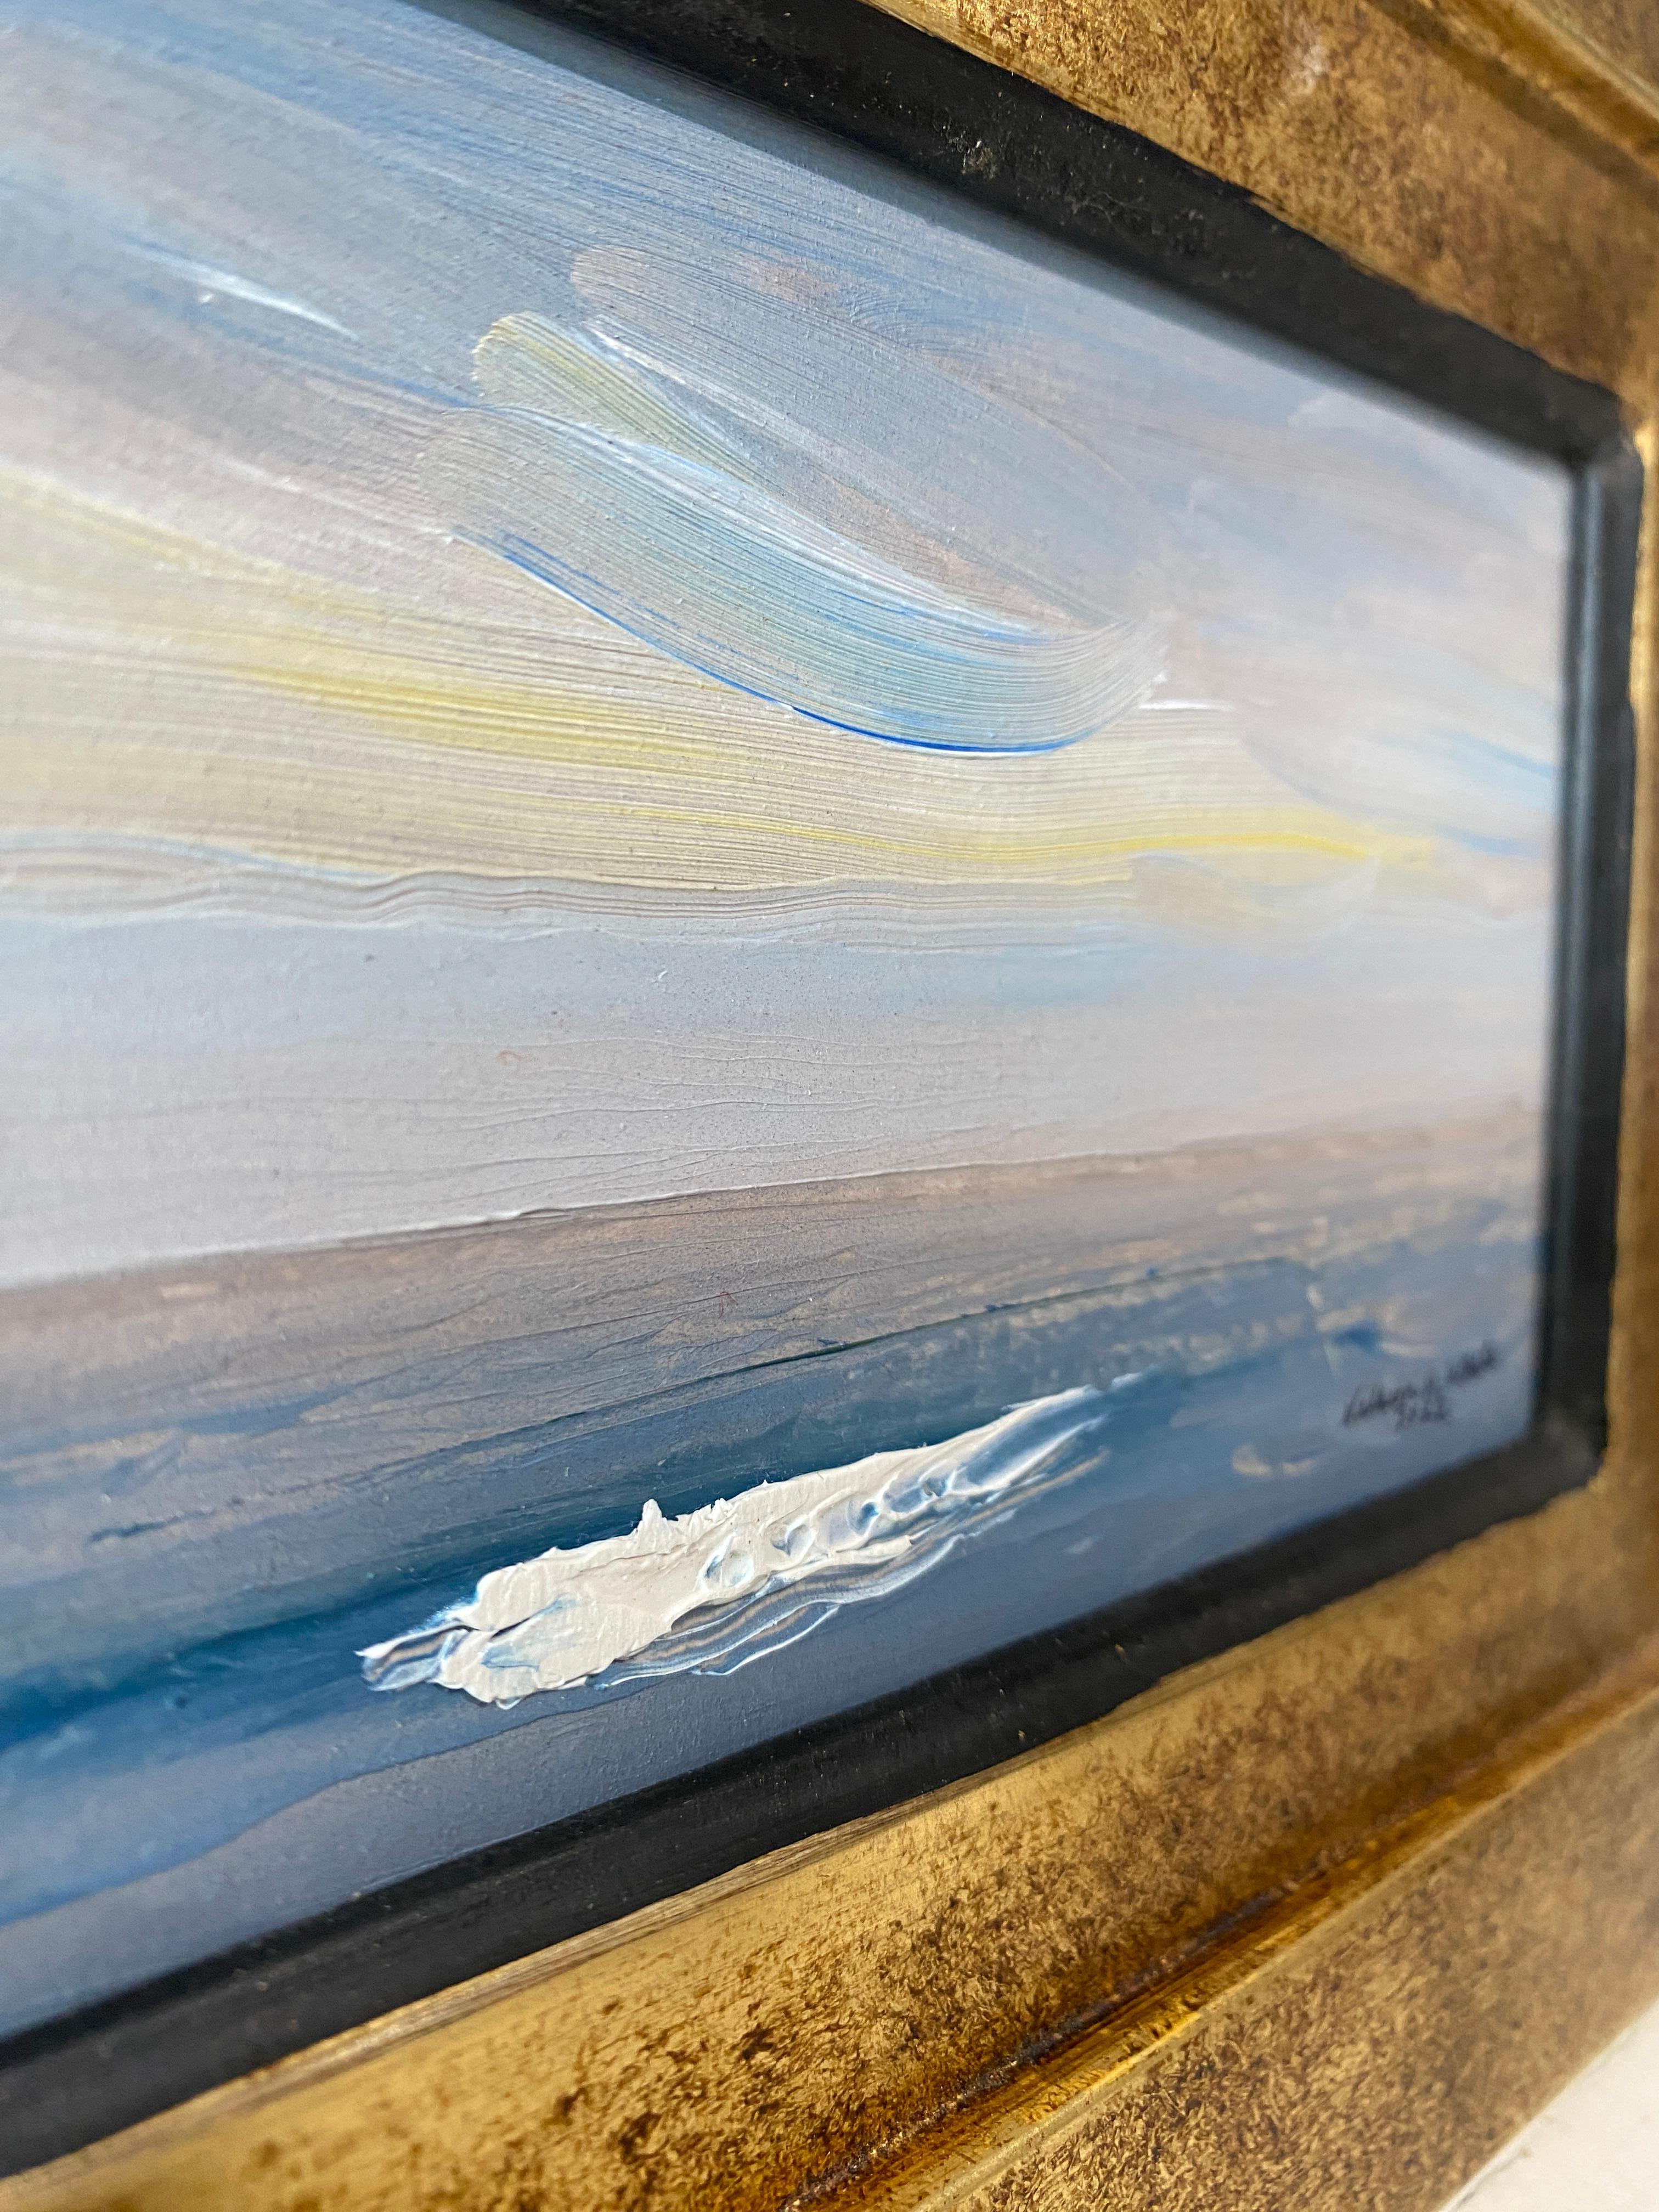 A serene plein air painting from Nelson White, featuring his recognizable impasto whitecaps. A deep blue sea meets a lilac-brown horizon, and ascends back into the blue sky, adorned with yellow light. 

Framed in a custom italian frame - bronze leaf